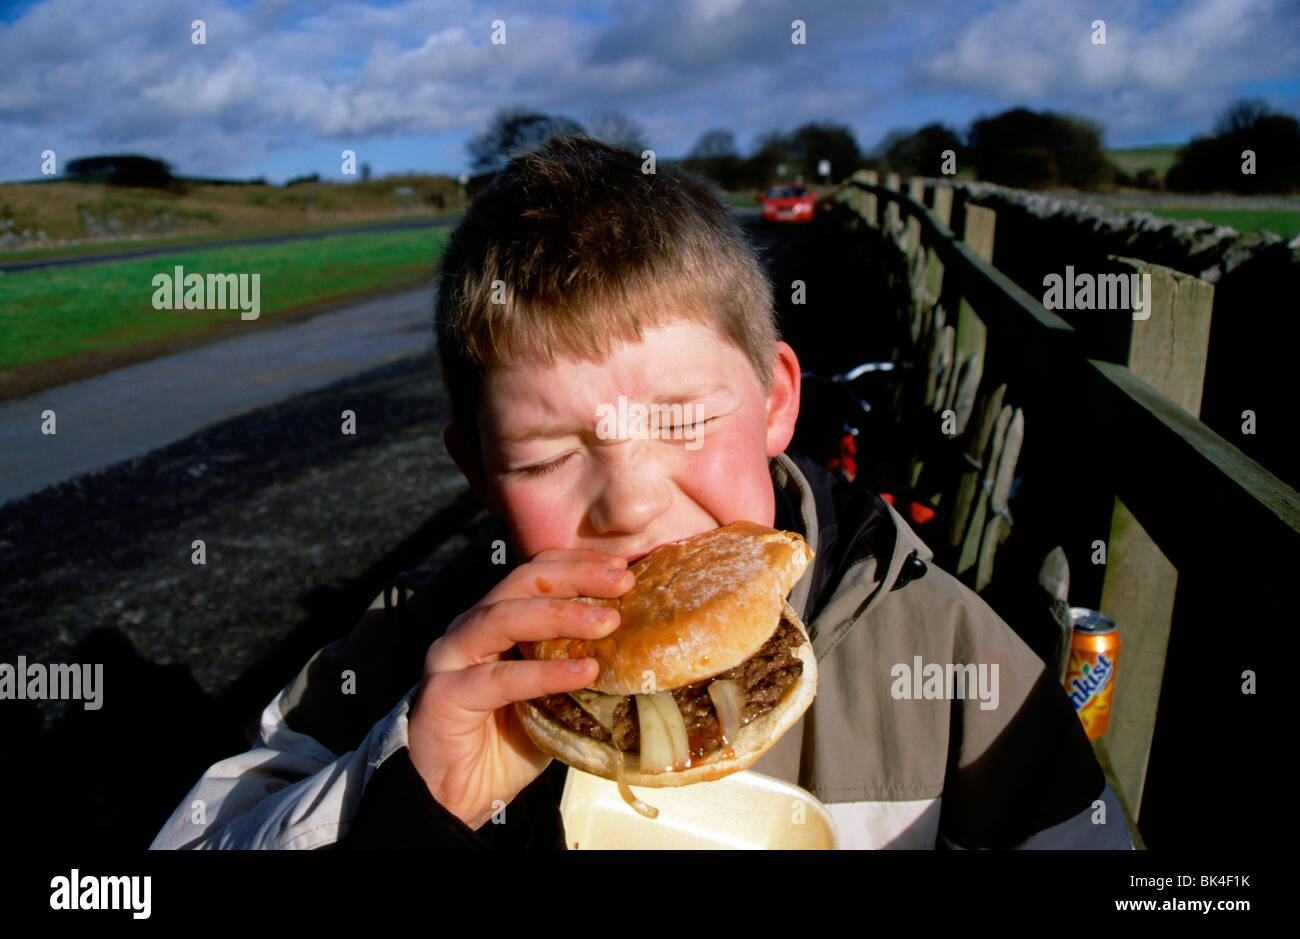 Stock Photograph of young boy biting into a burger bought from a road side café. Stock Photo